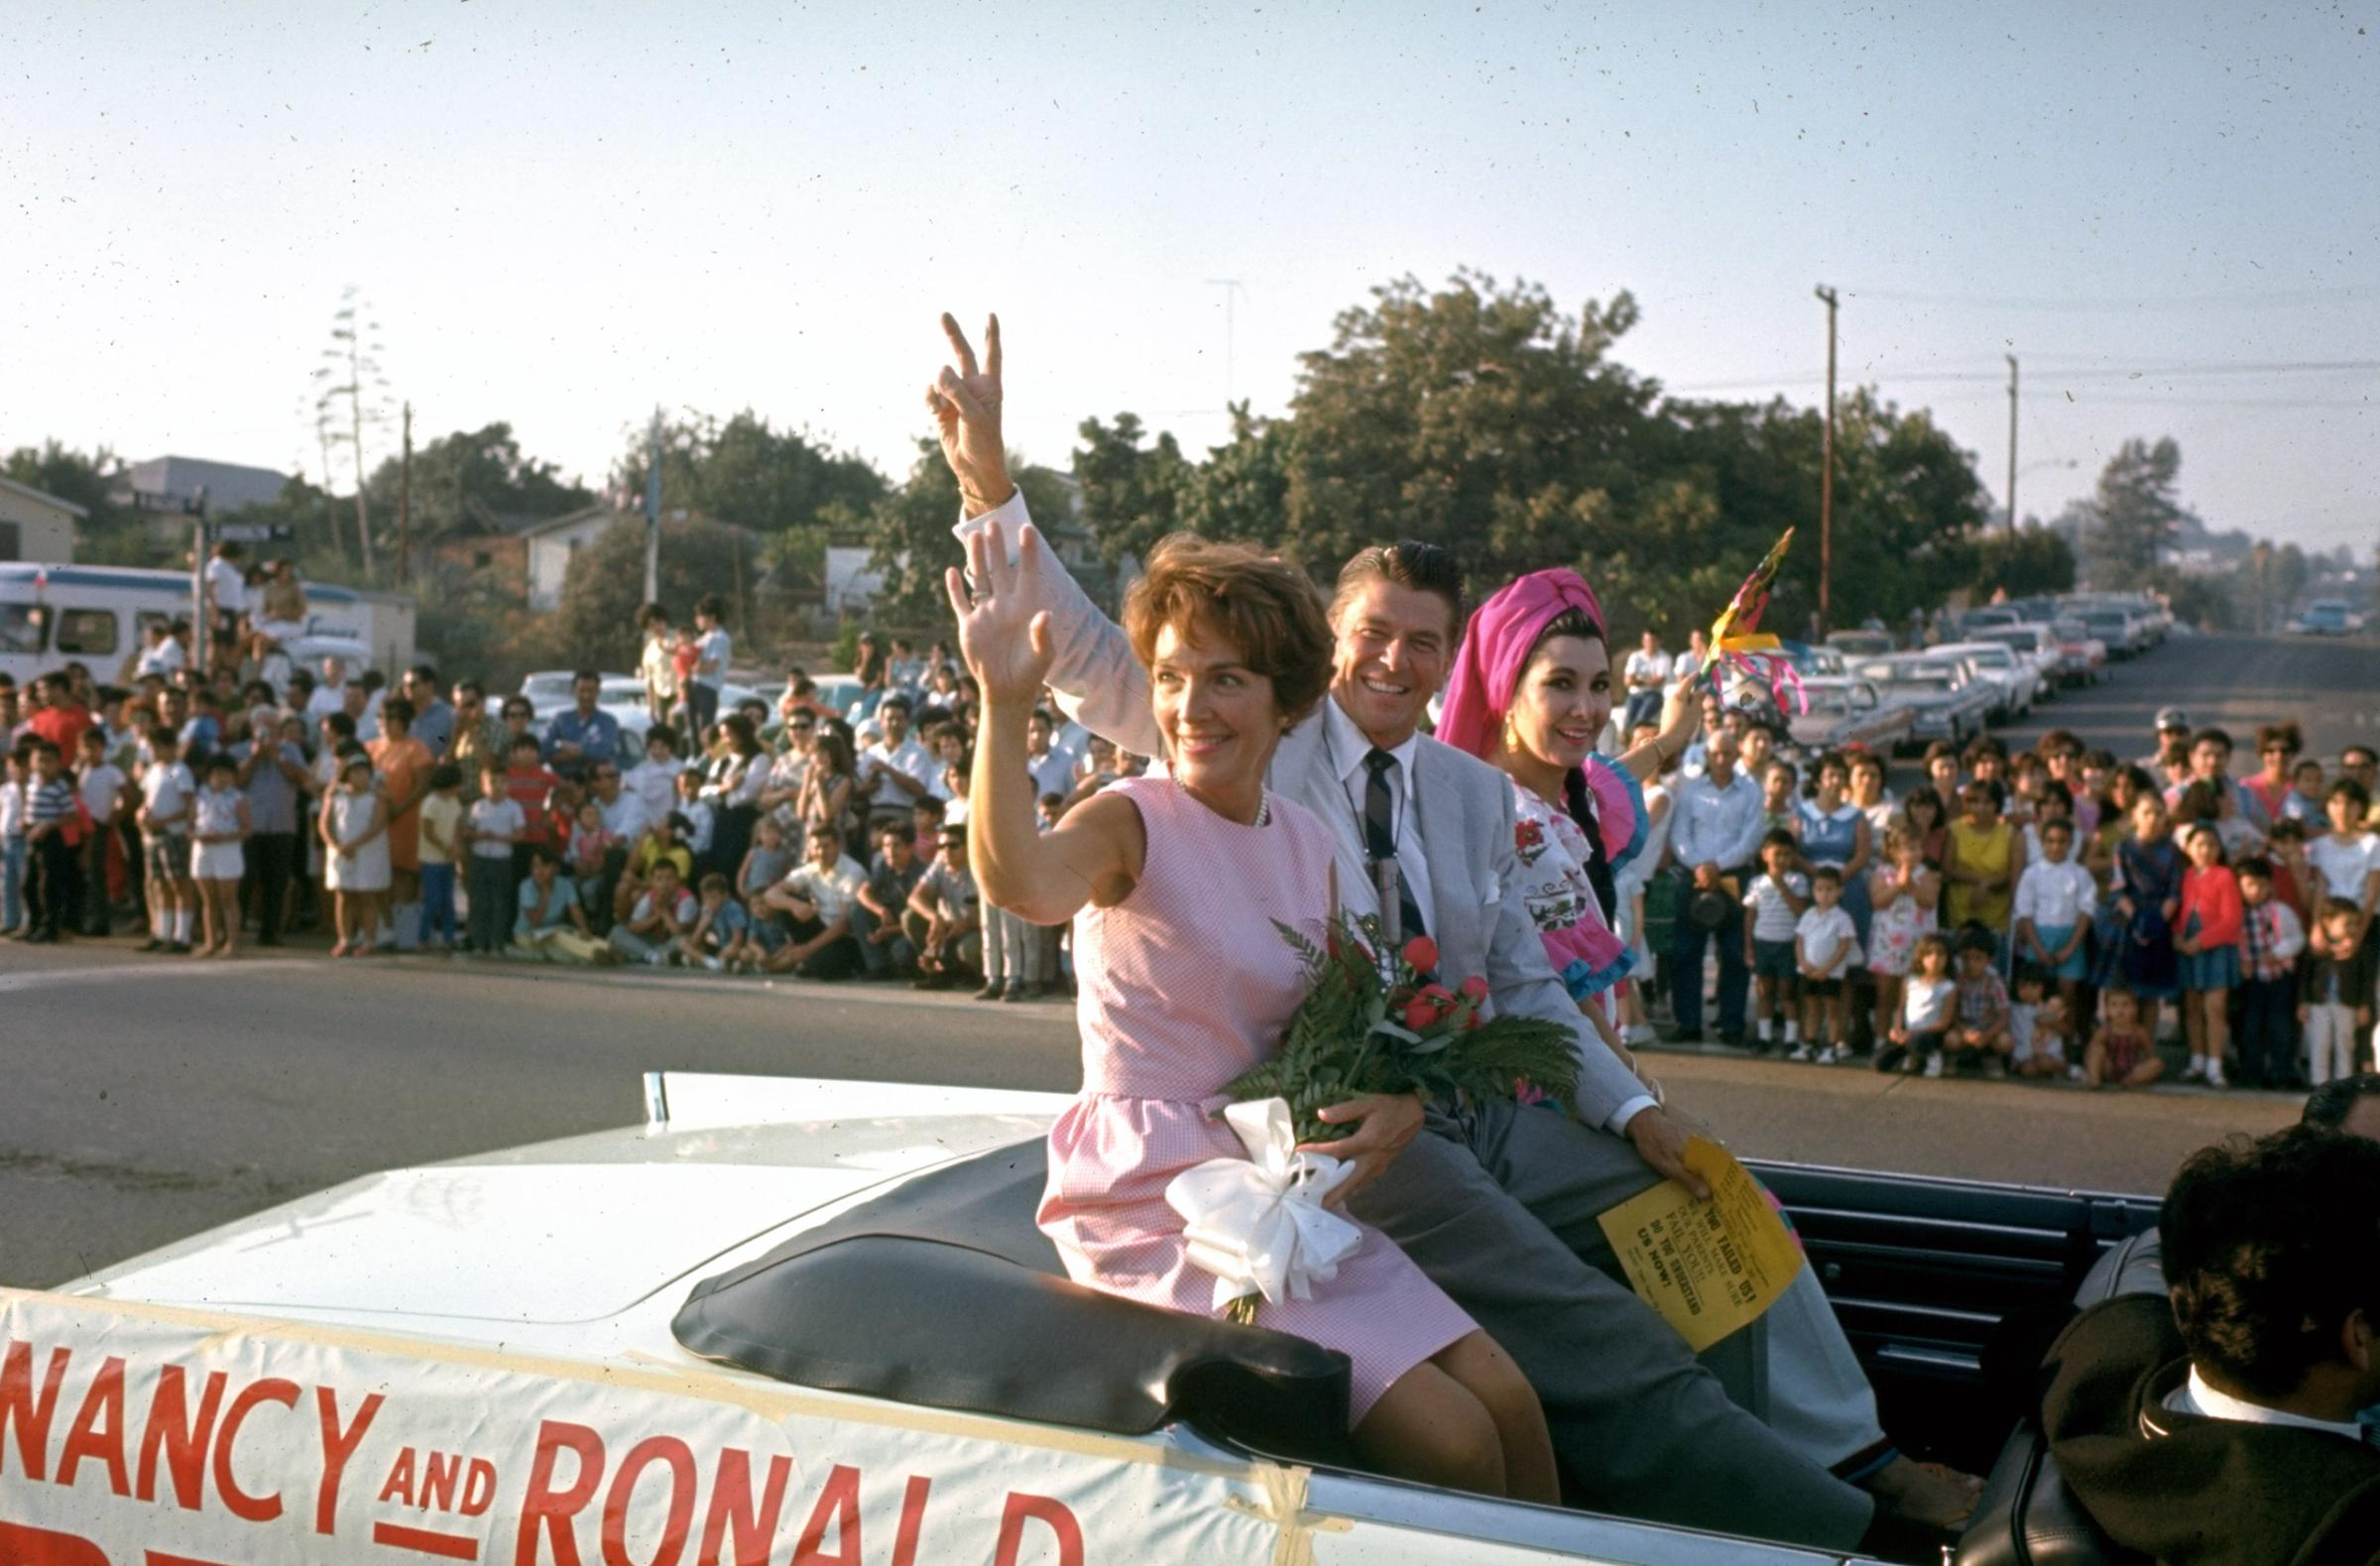 California Republican gubernatorial candidate Ronald Reagan,wife Nancy waving to spectators as they ride in back of convertible car outside while on the campaign trail, 1966.